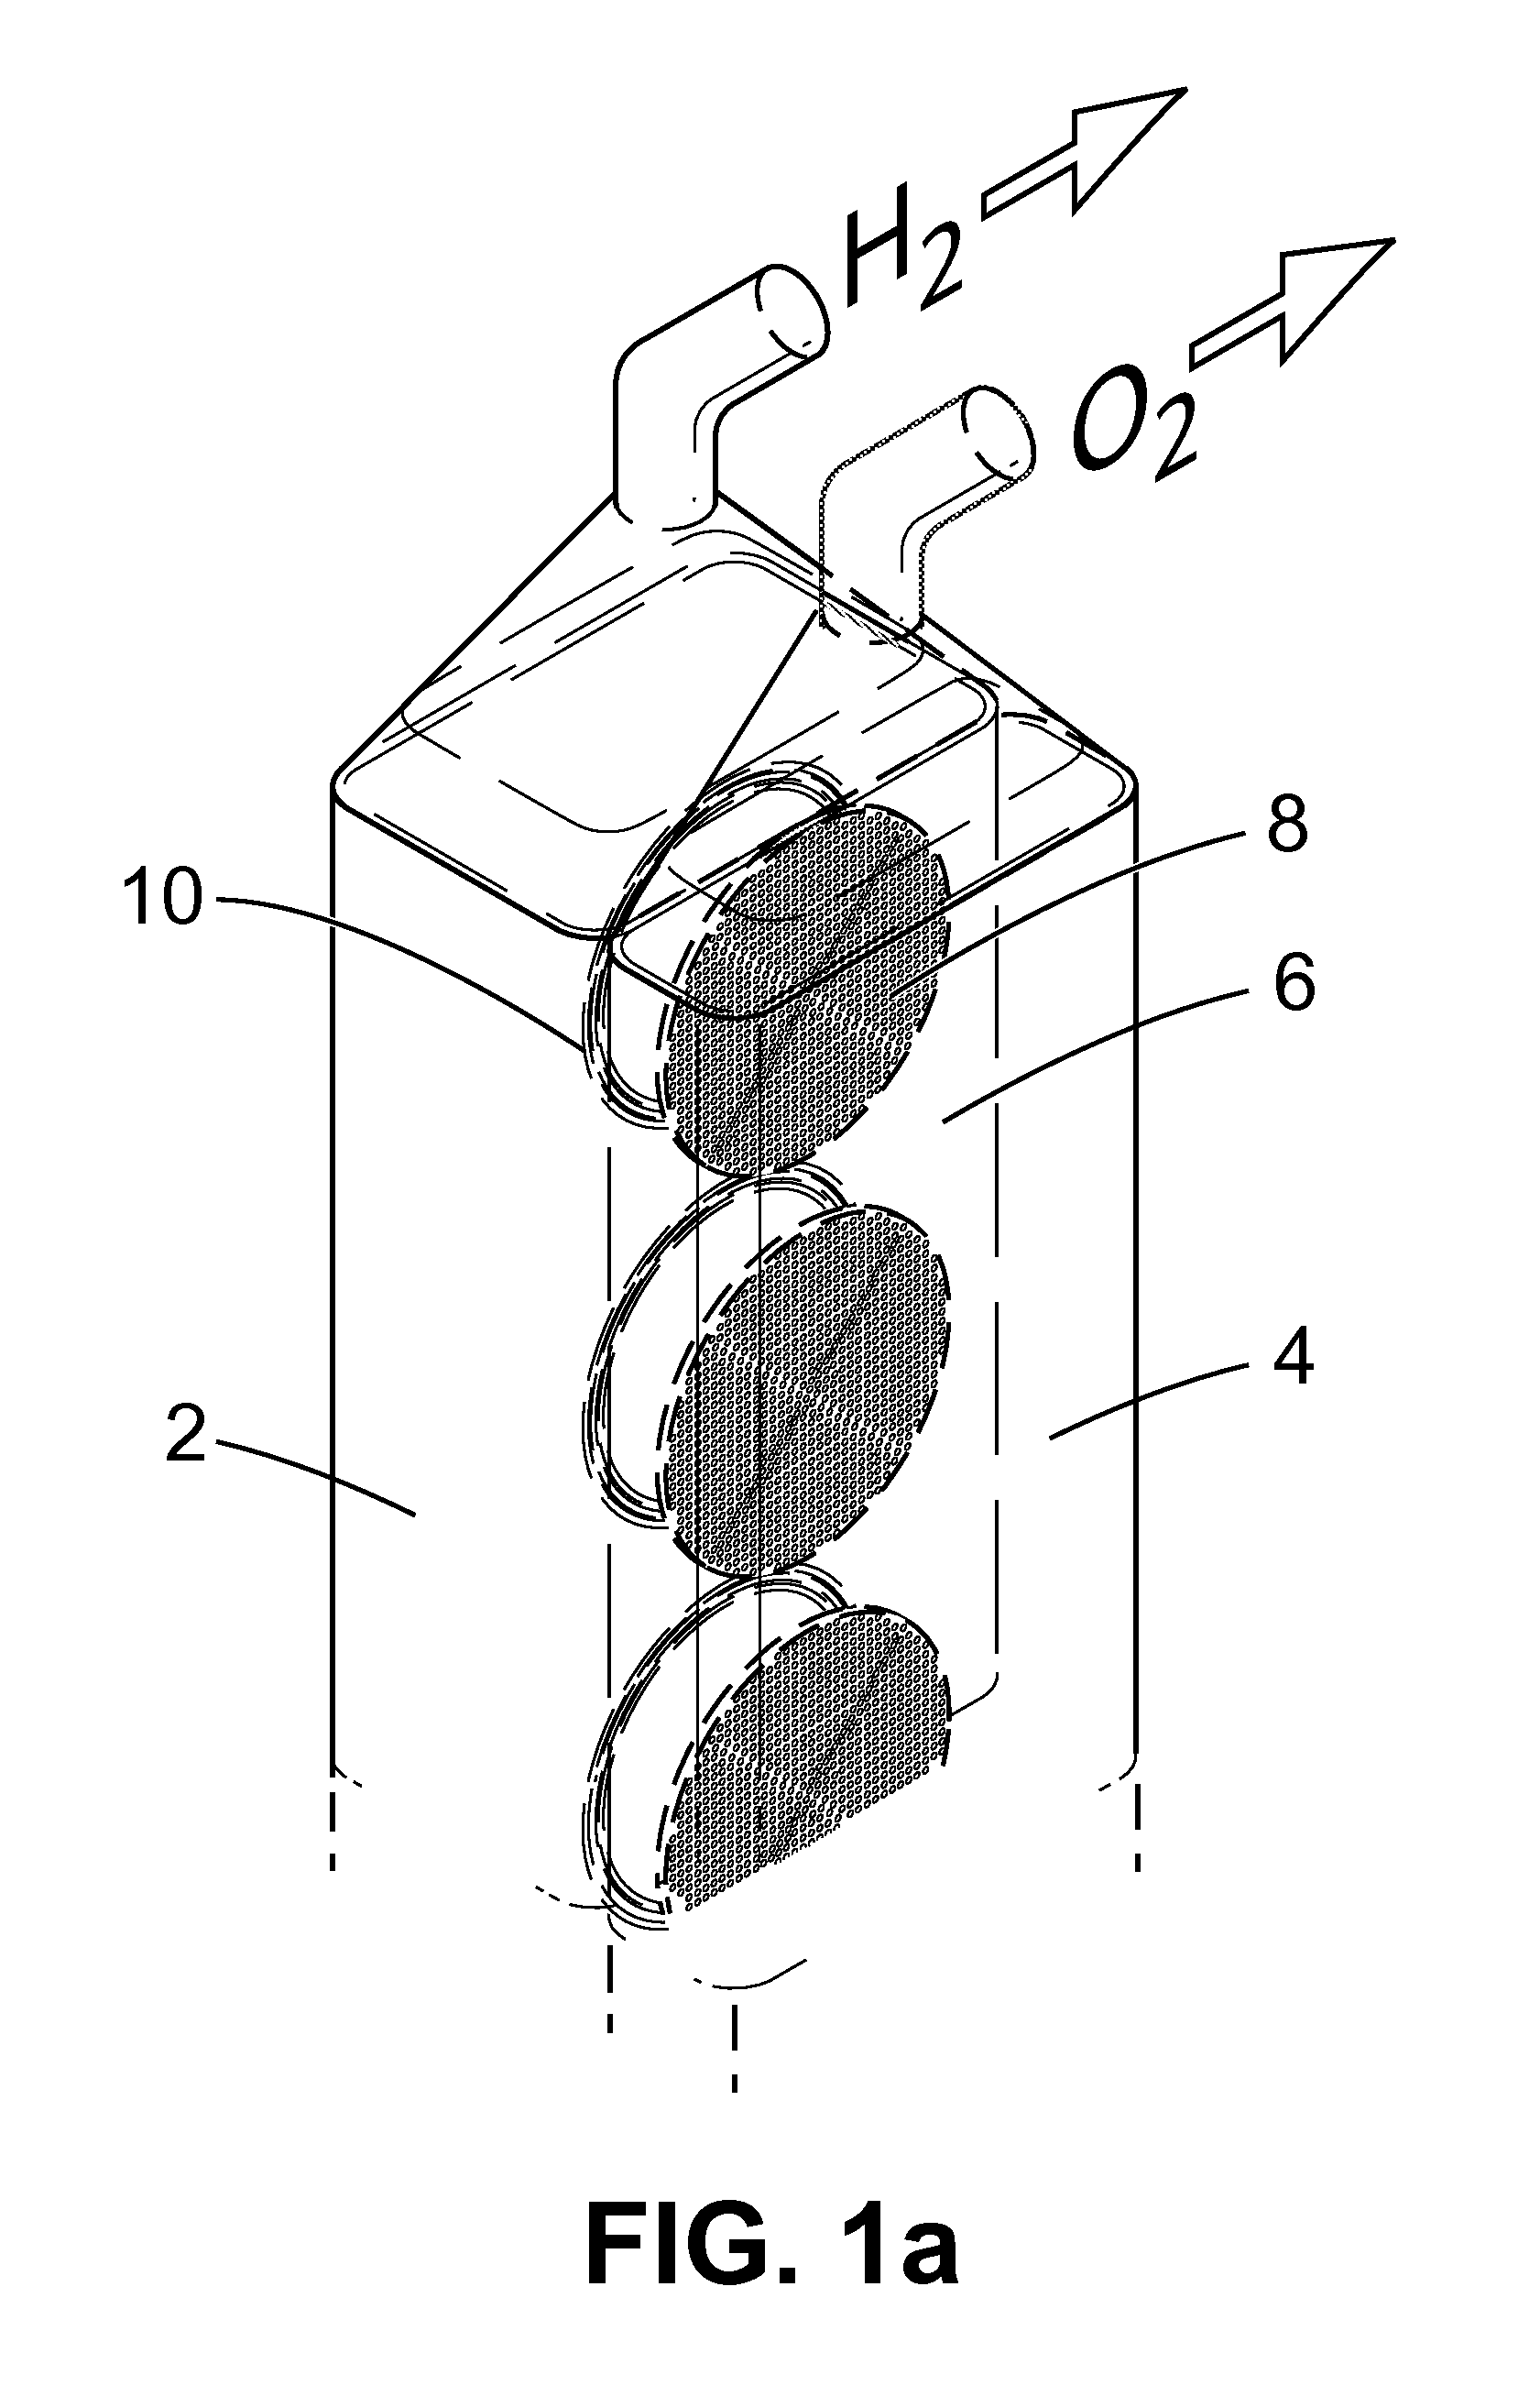 Apparatus and Method for the Electrolysis of Water